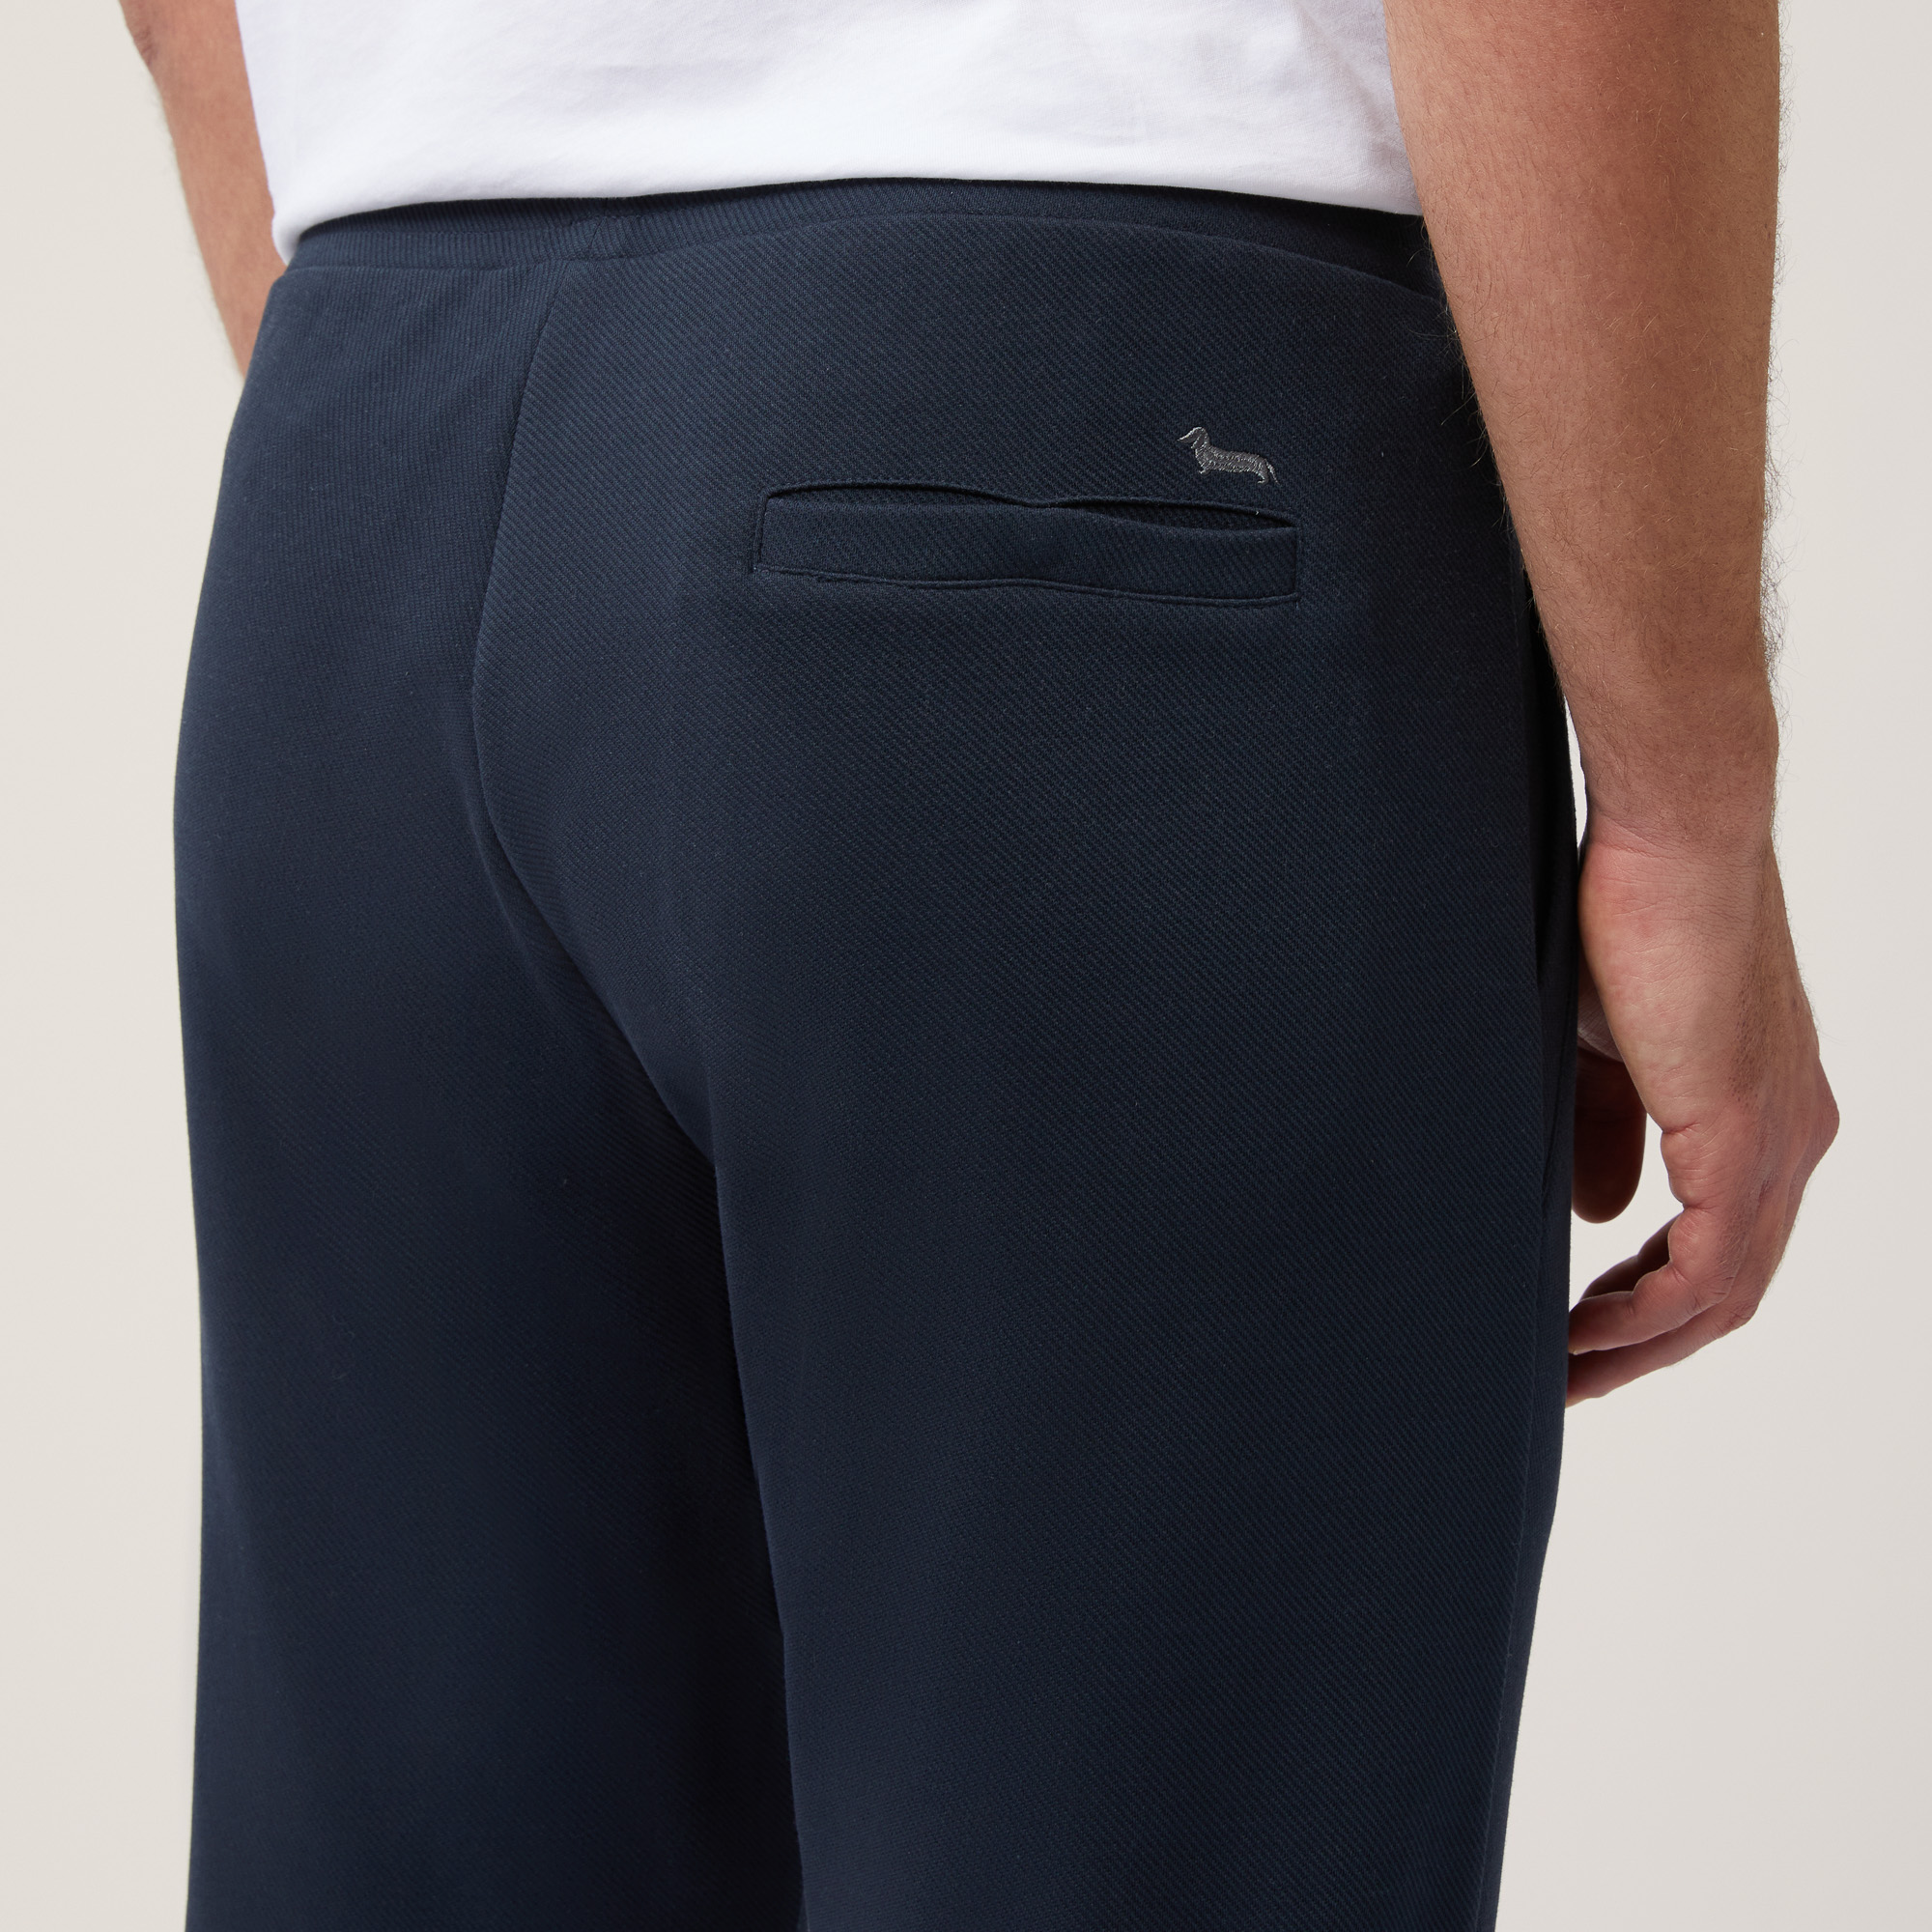 Pantalone In Cotone Stretch Con Tasca Posteriore, Blu Navy, large image number 2